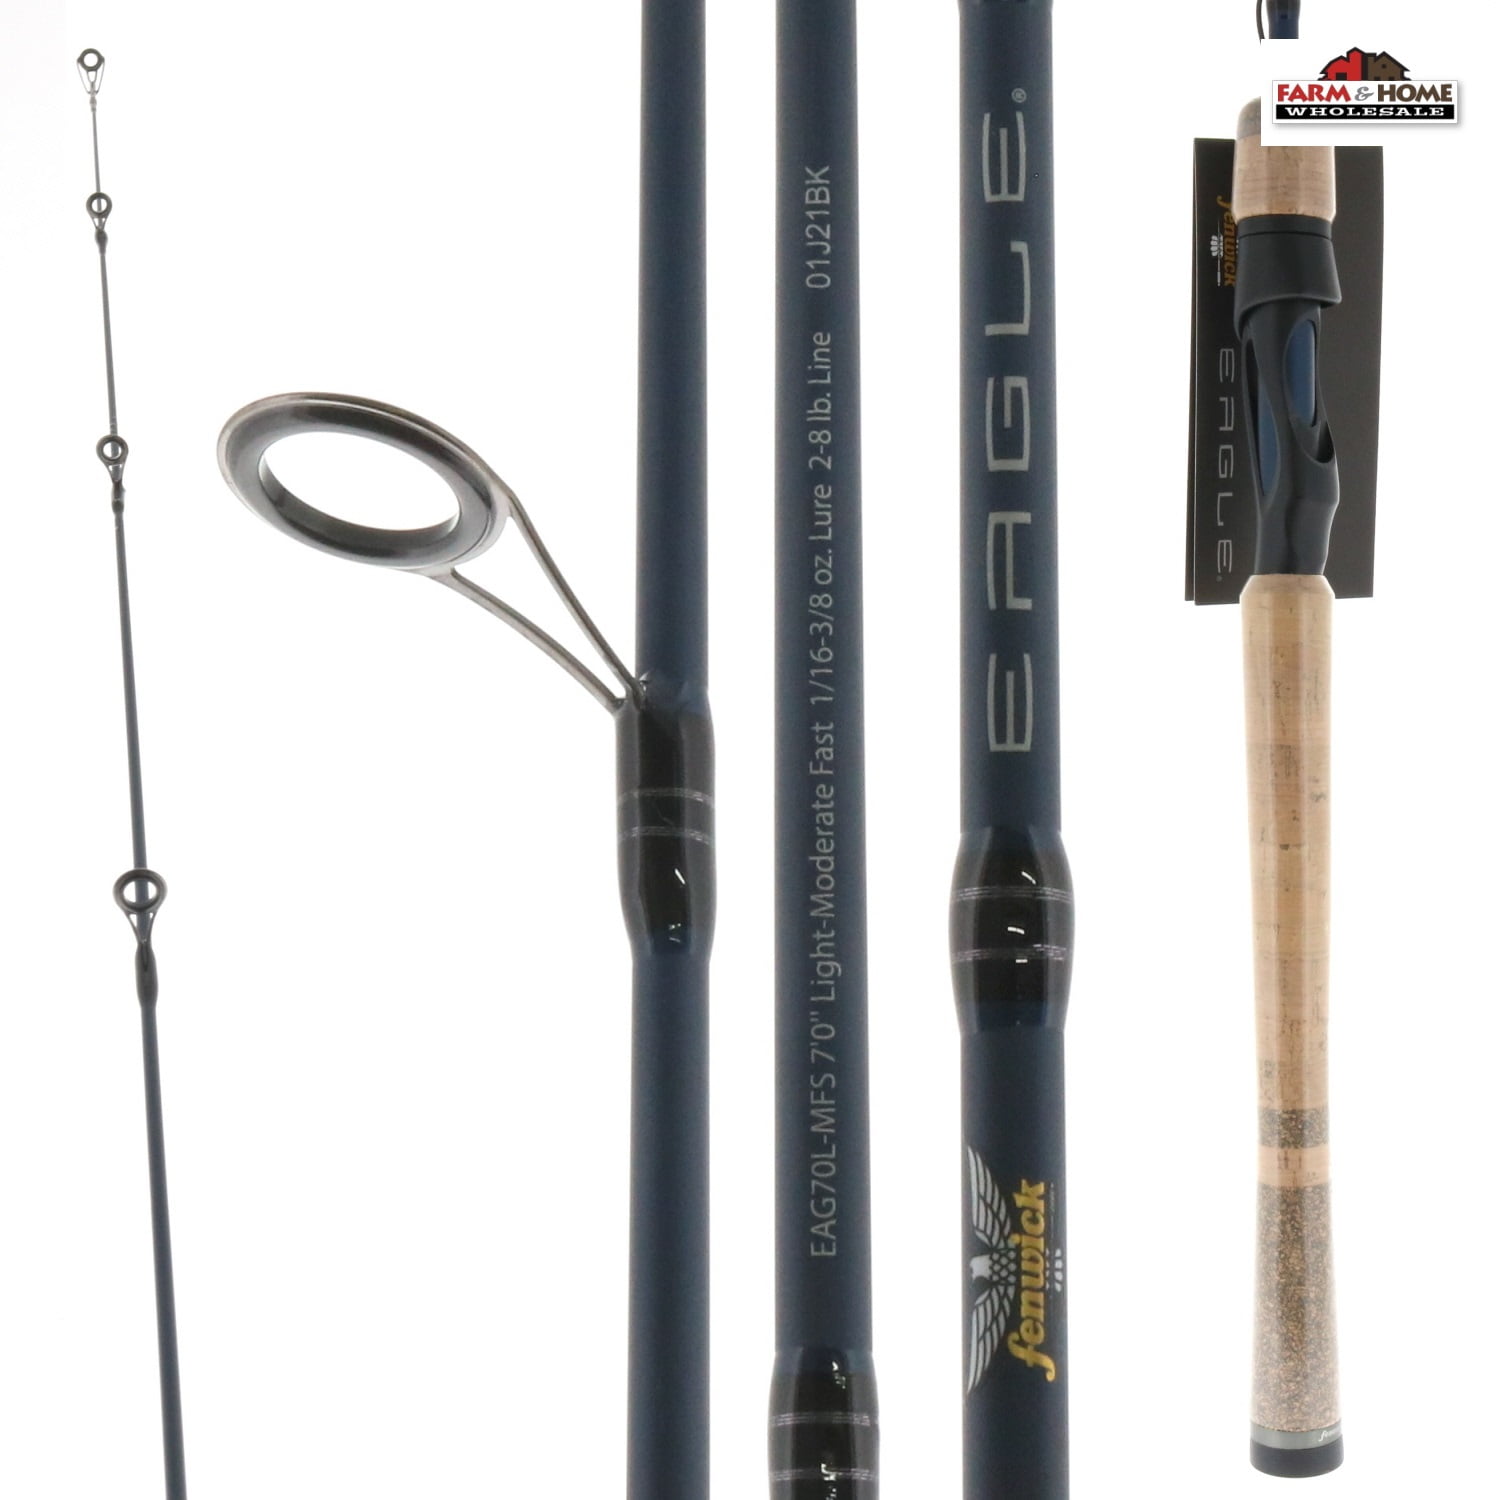 Fenwick Eagle L Moderate Fast Spinning Rod - 5', 1-Piece - Save 42%